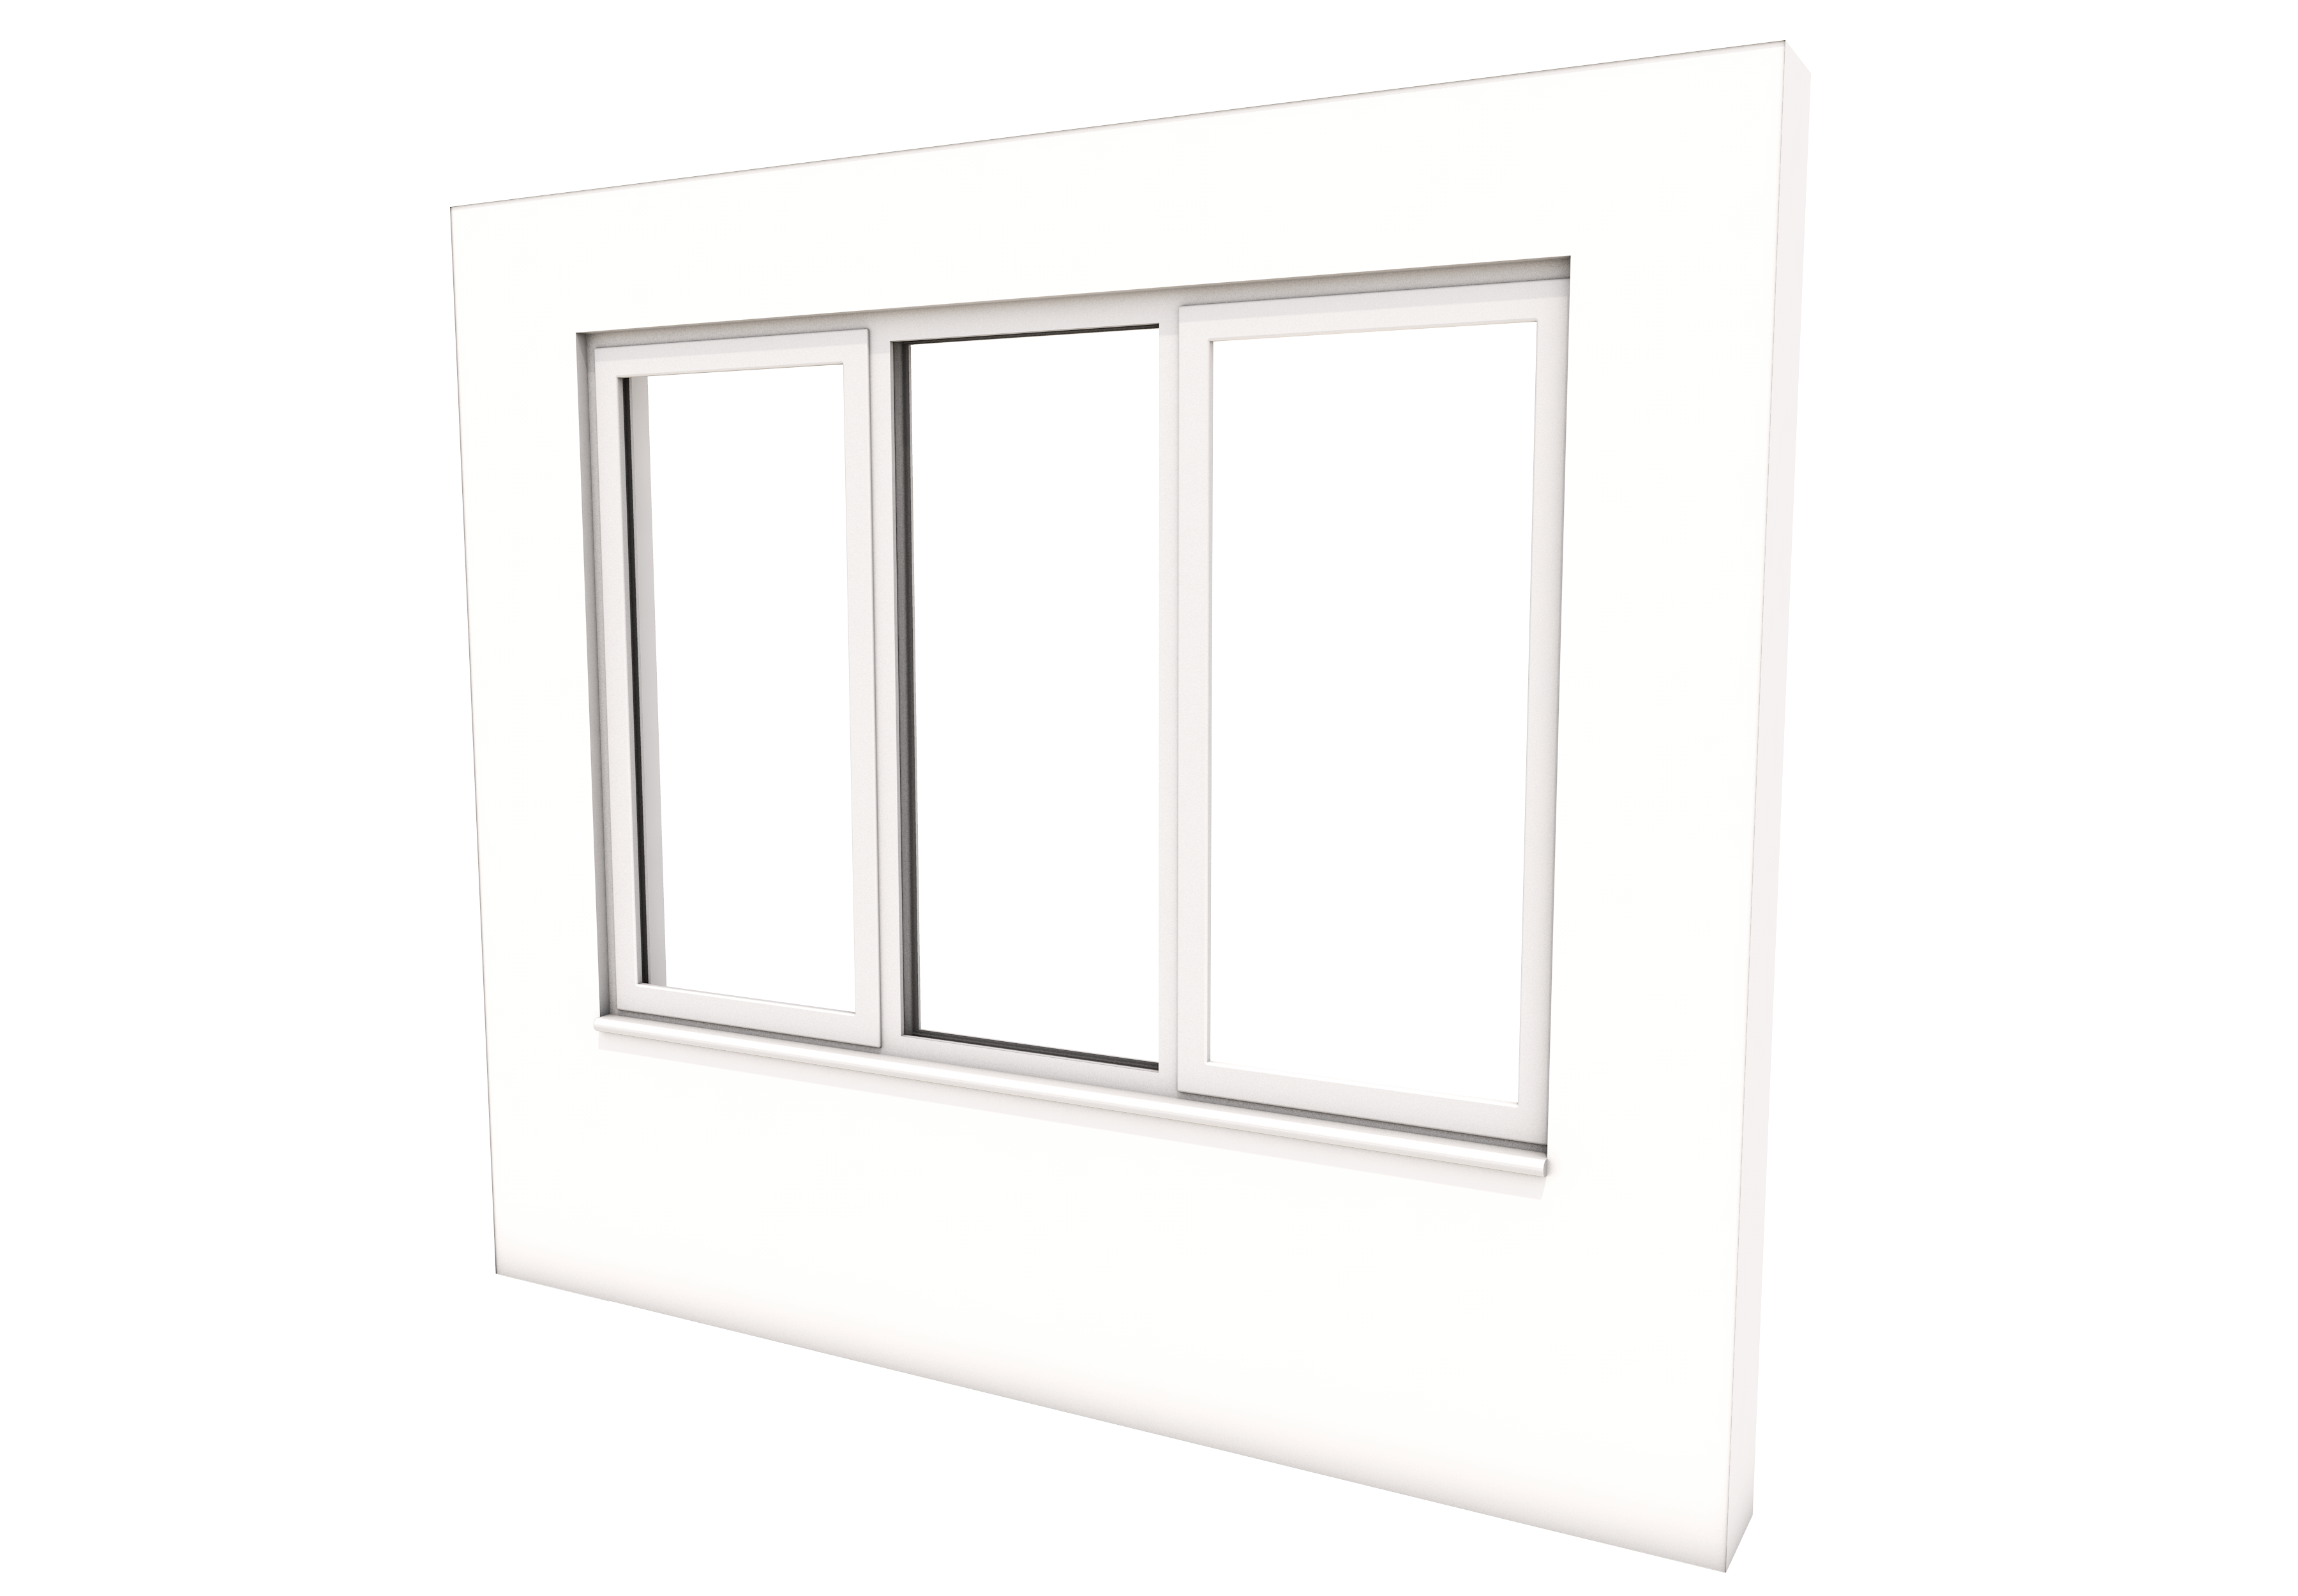 Smart Alitherm 300 Window - 1800 x 1200 mm - Fixed Middle Pane